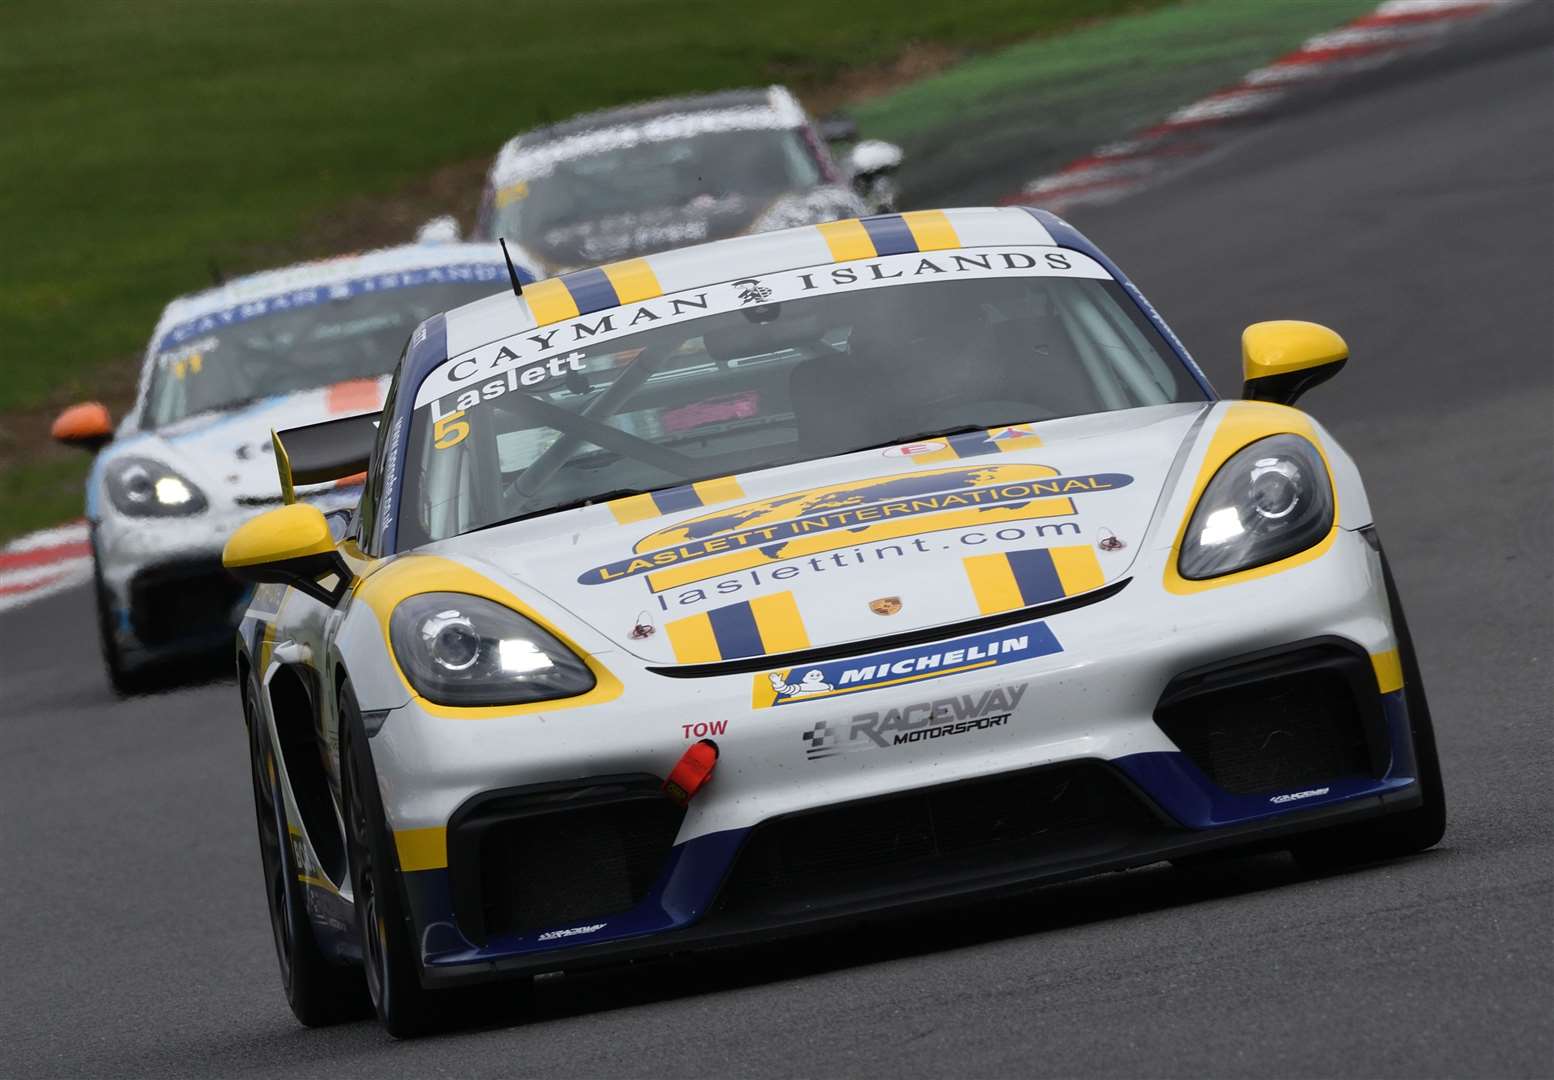 Rupert Laslett, from West Hythe, finished first and third, retiring in race two, in the supporting Sprint Challenge GB event racing his Porsche 718 Cayman GT4. Picture: Simon Hildrew